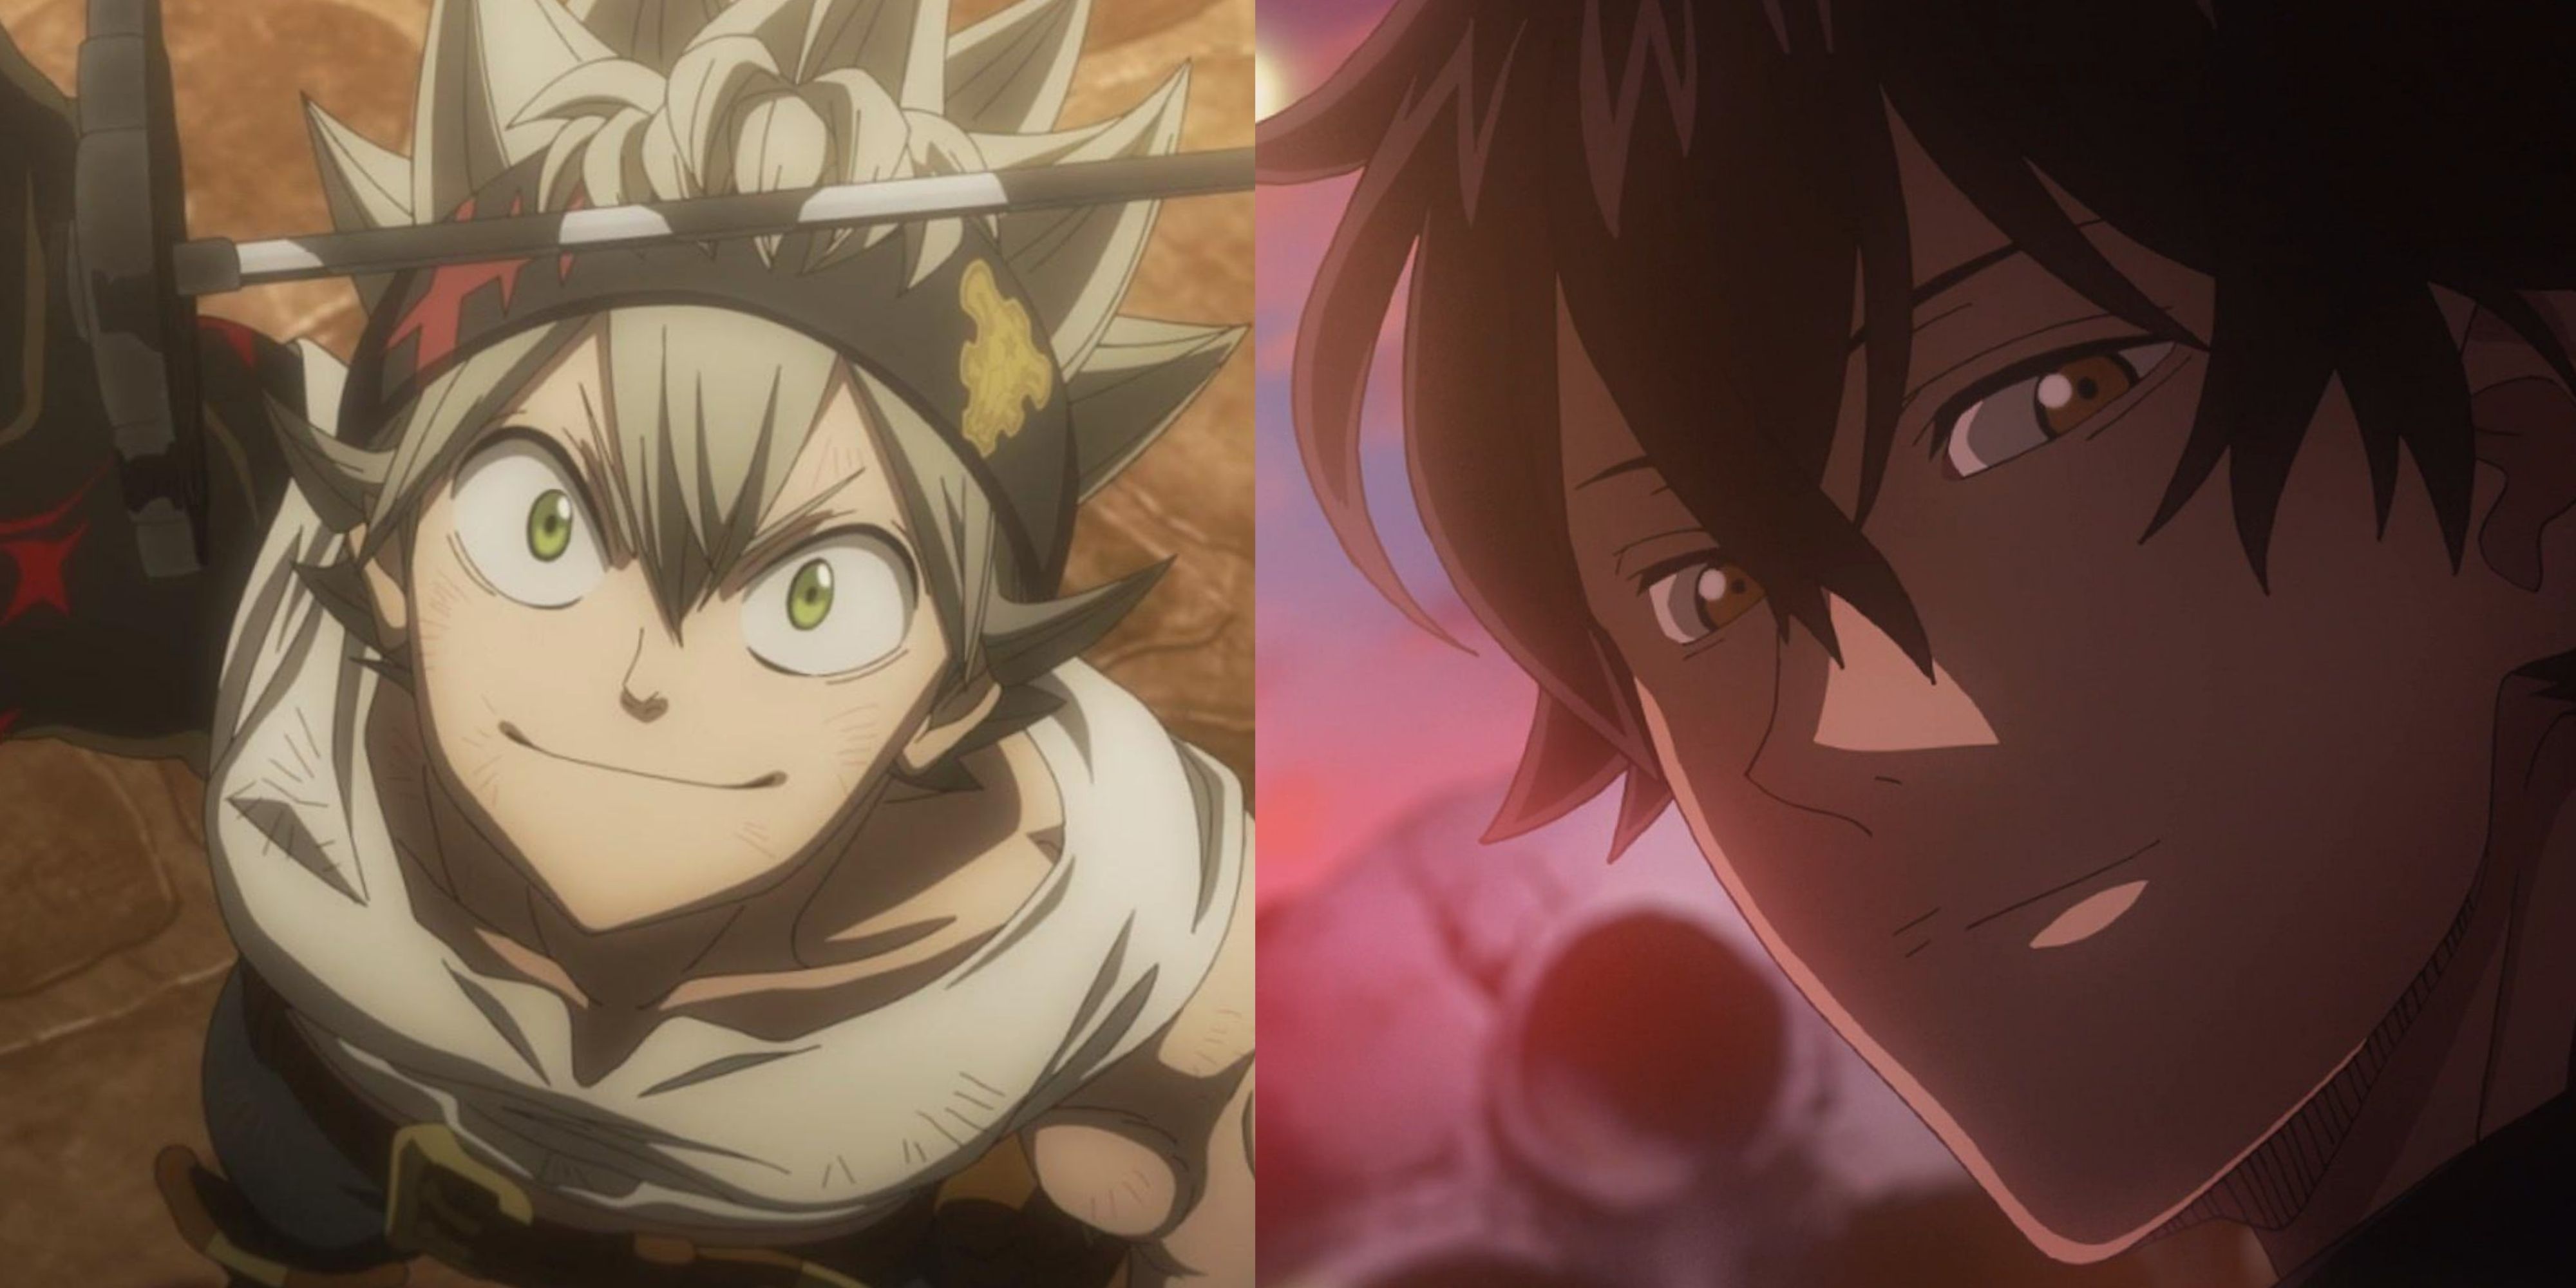 Black Clover Movie - What We Know So Far